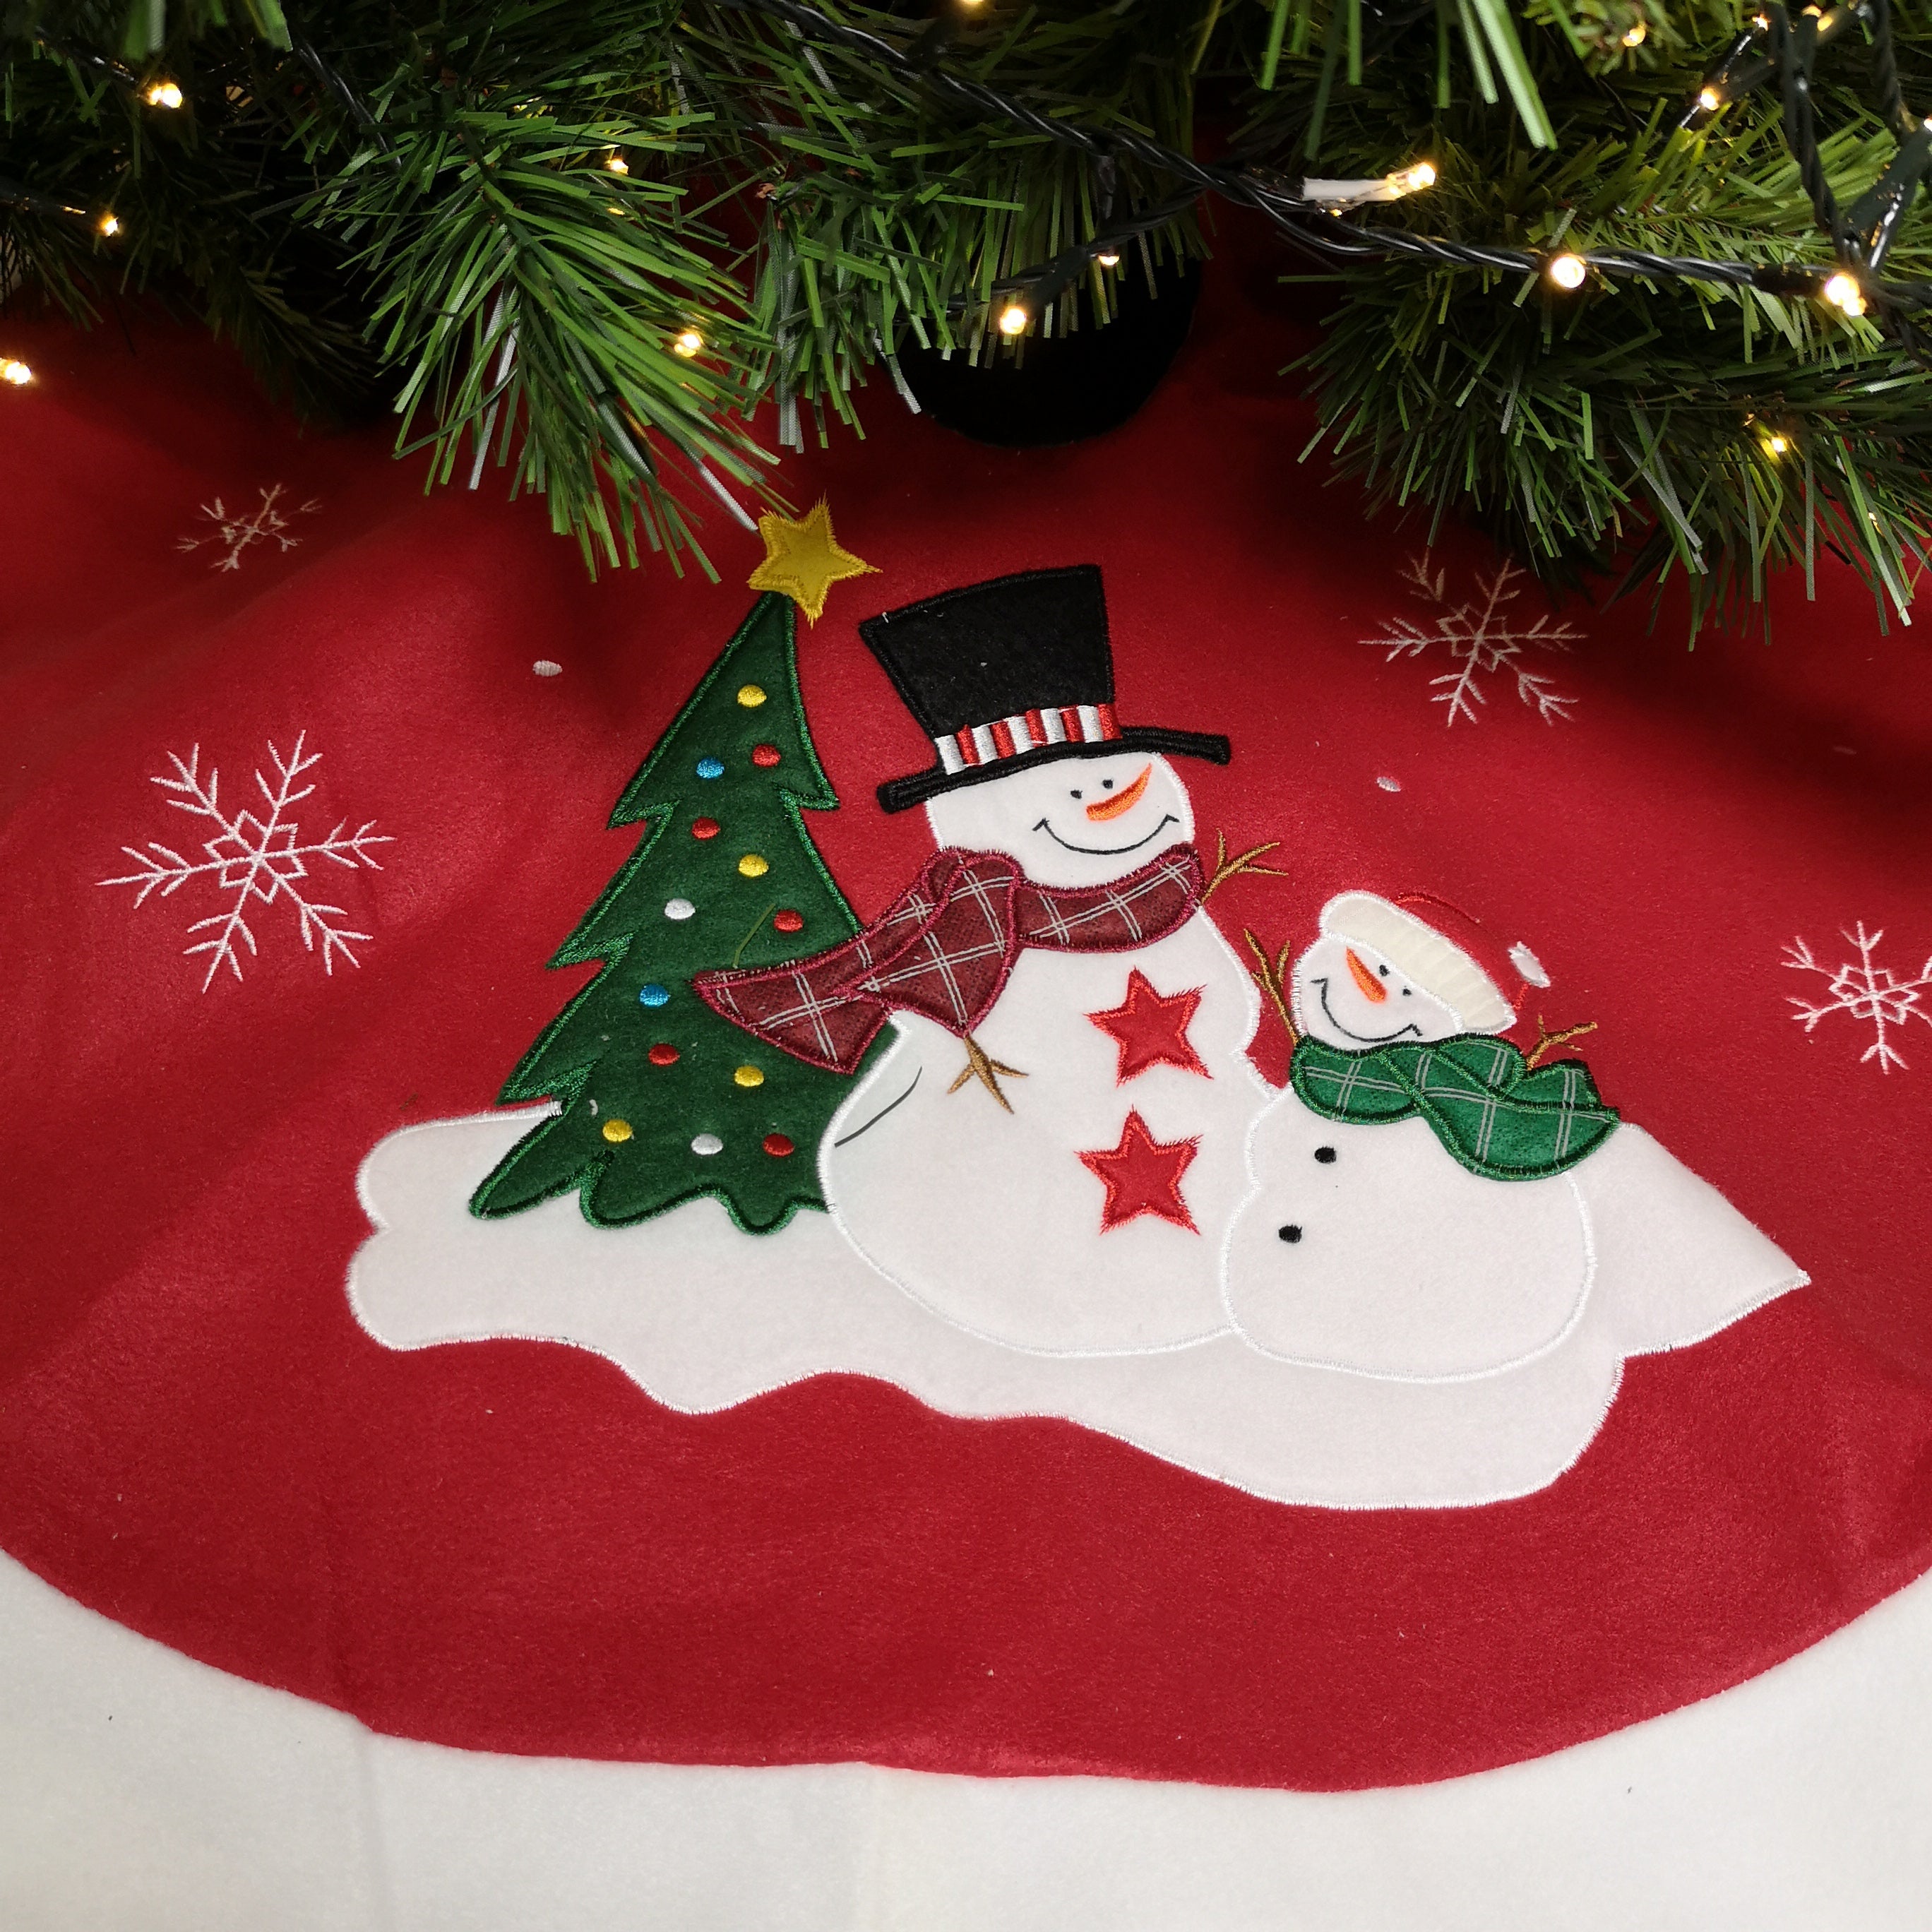 90cm Premier Red Fabric Christmas Tree Skirt with Snowman Scene